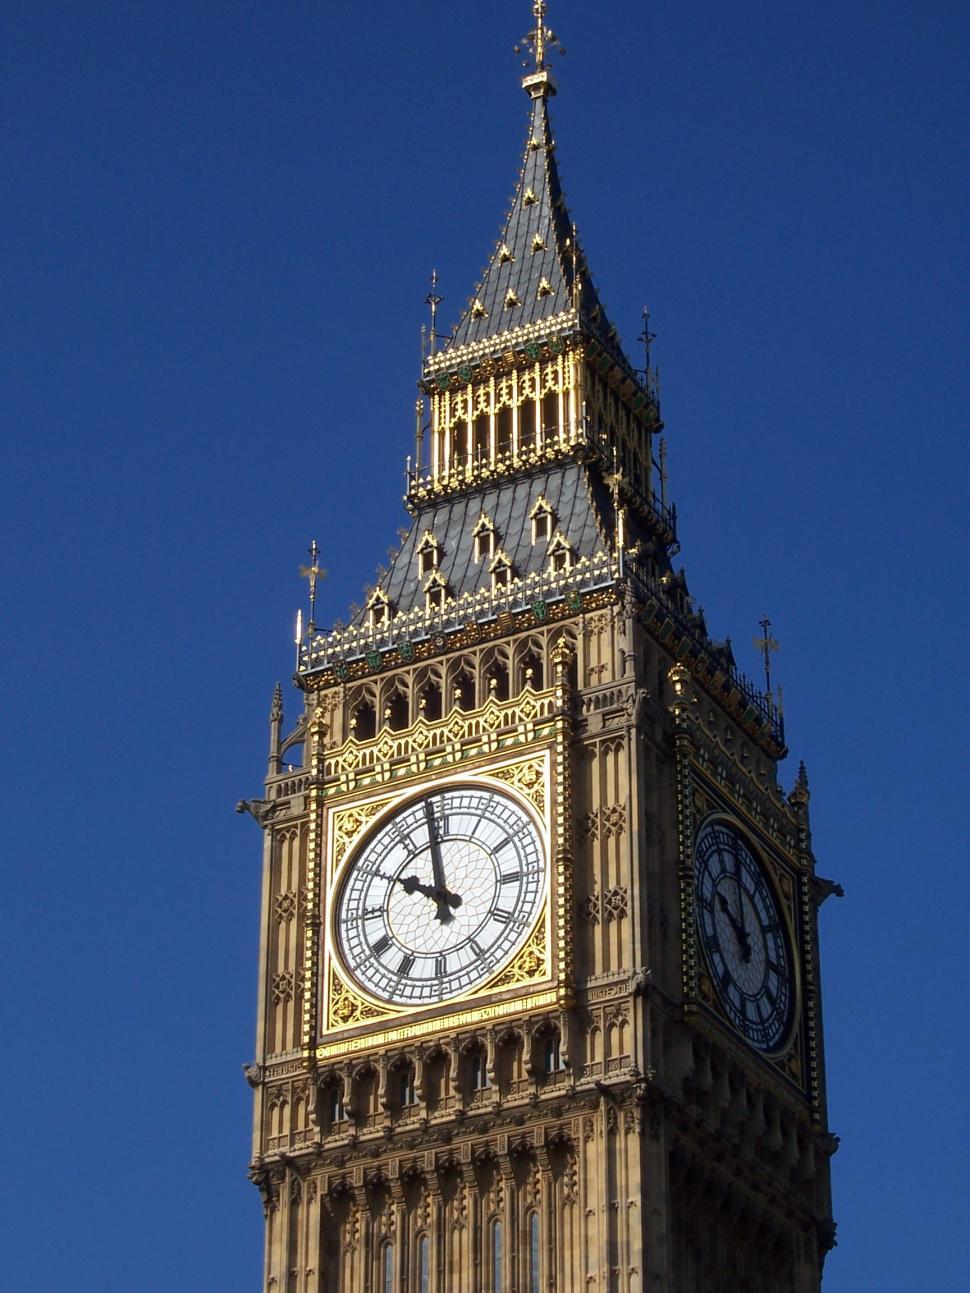 Free Image of Tall Clock Tower With Four Clocks 